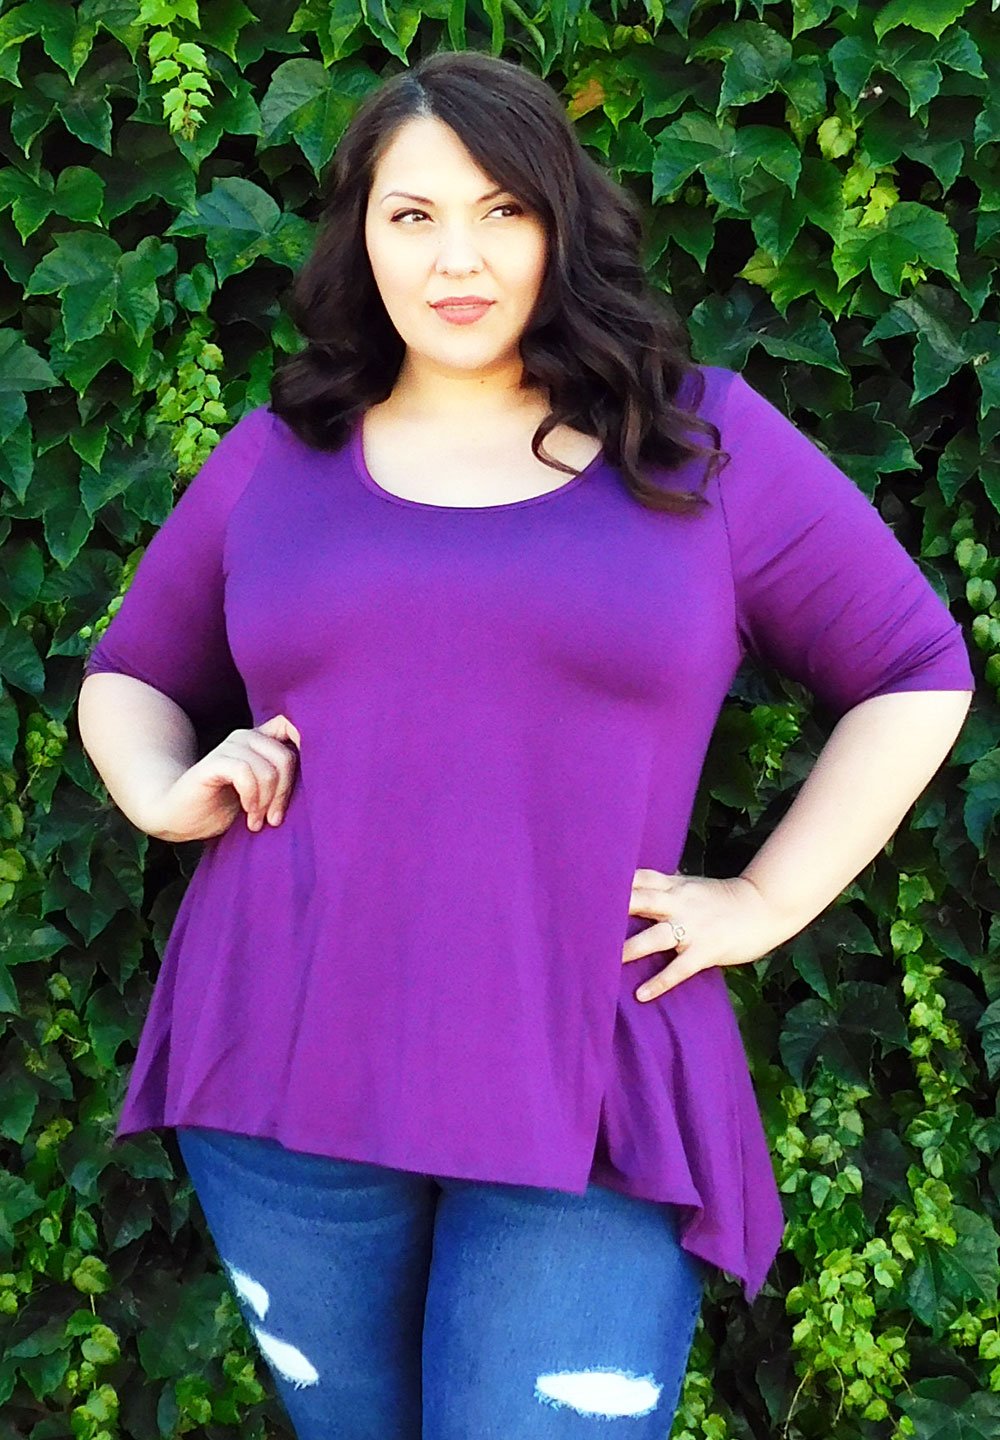 Stylish and Trendy Plus Size Tops | Polly Top | SWAK Designs